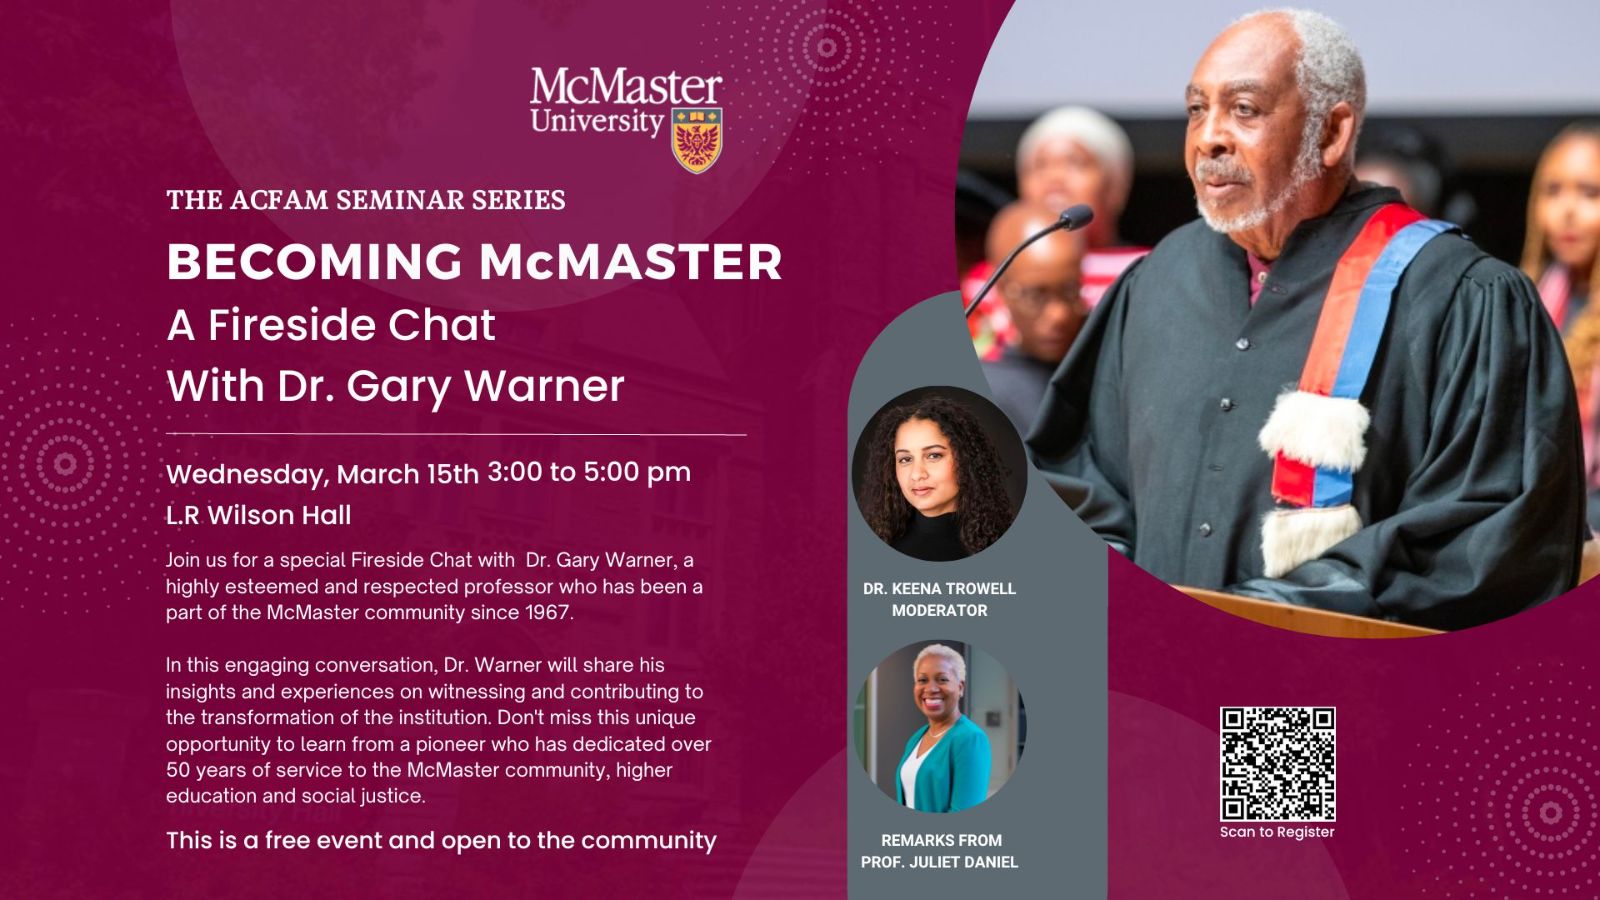 A graphic advertising the event "Becoming McMaster," a Fireside Chat with Dr. Gary Warner. The graphic features a photo of Warner and a headshot of Juliet Daniel and Keena Trowell.